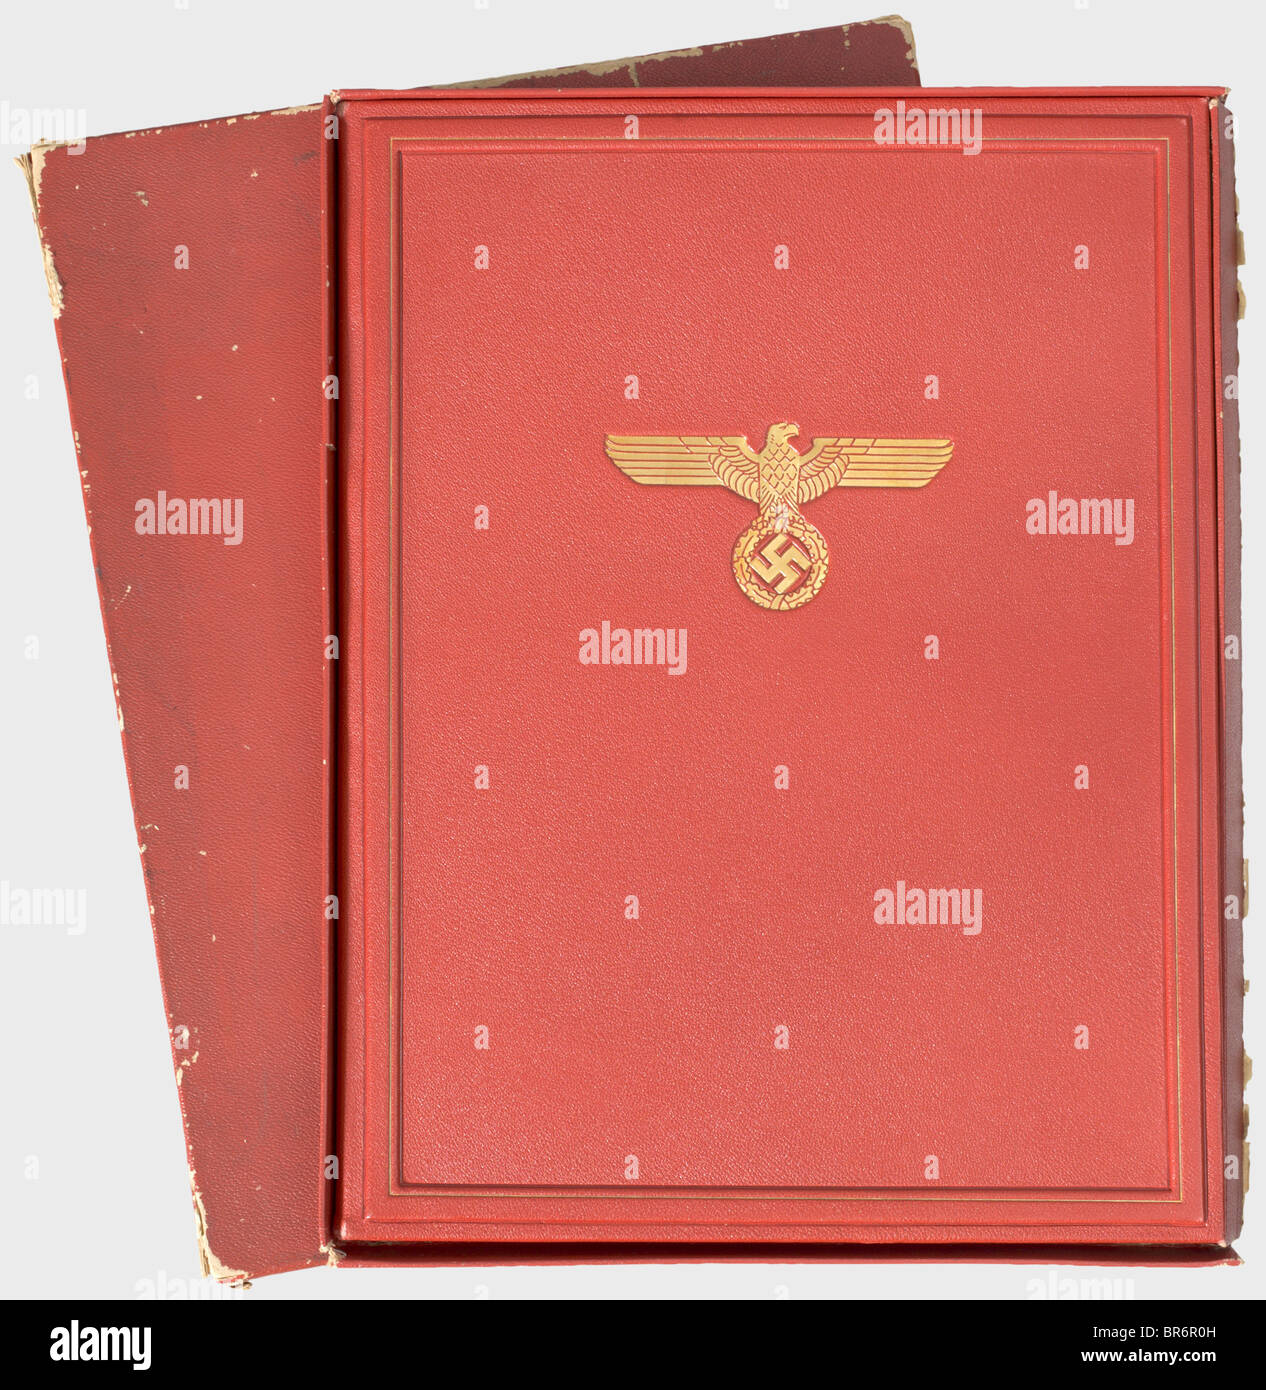 An award casement for the German Order., Red leather portfolio with a gold-stamped national eagle and border line, the interior with red silk liner (spotted), raised leather frame with gold border and lateral insert for the award document. Dimensions 32 x 42 cm. In a damaged red protective carton. Very rare. These folders, stored at the Brown House in Munich, were appropriated by a G.I. Laid in is an occupation forces programme dated 1 June 1945. historic, historical, 1930s, 20th century, document, documents, certificate, certificates, NS, National Socialism, N, Stock Photo